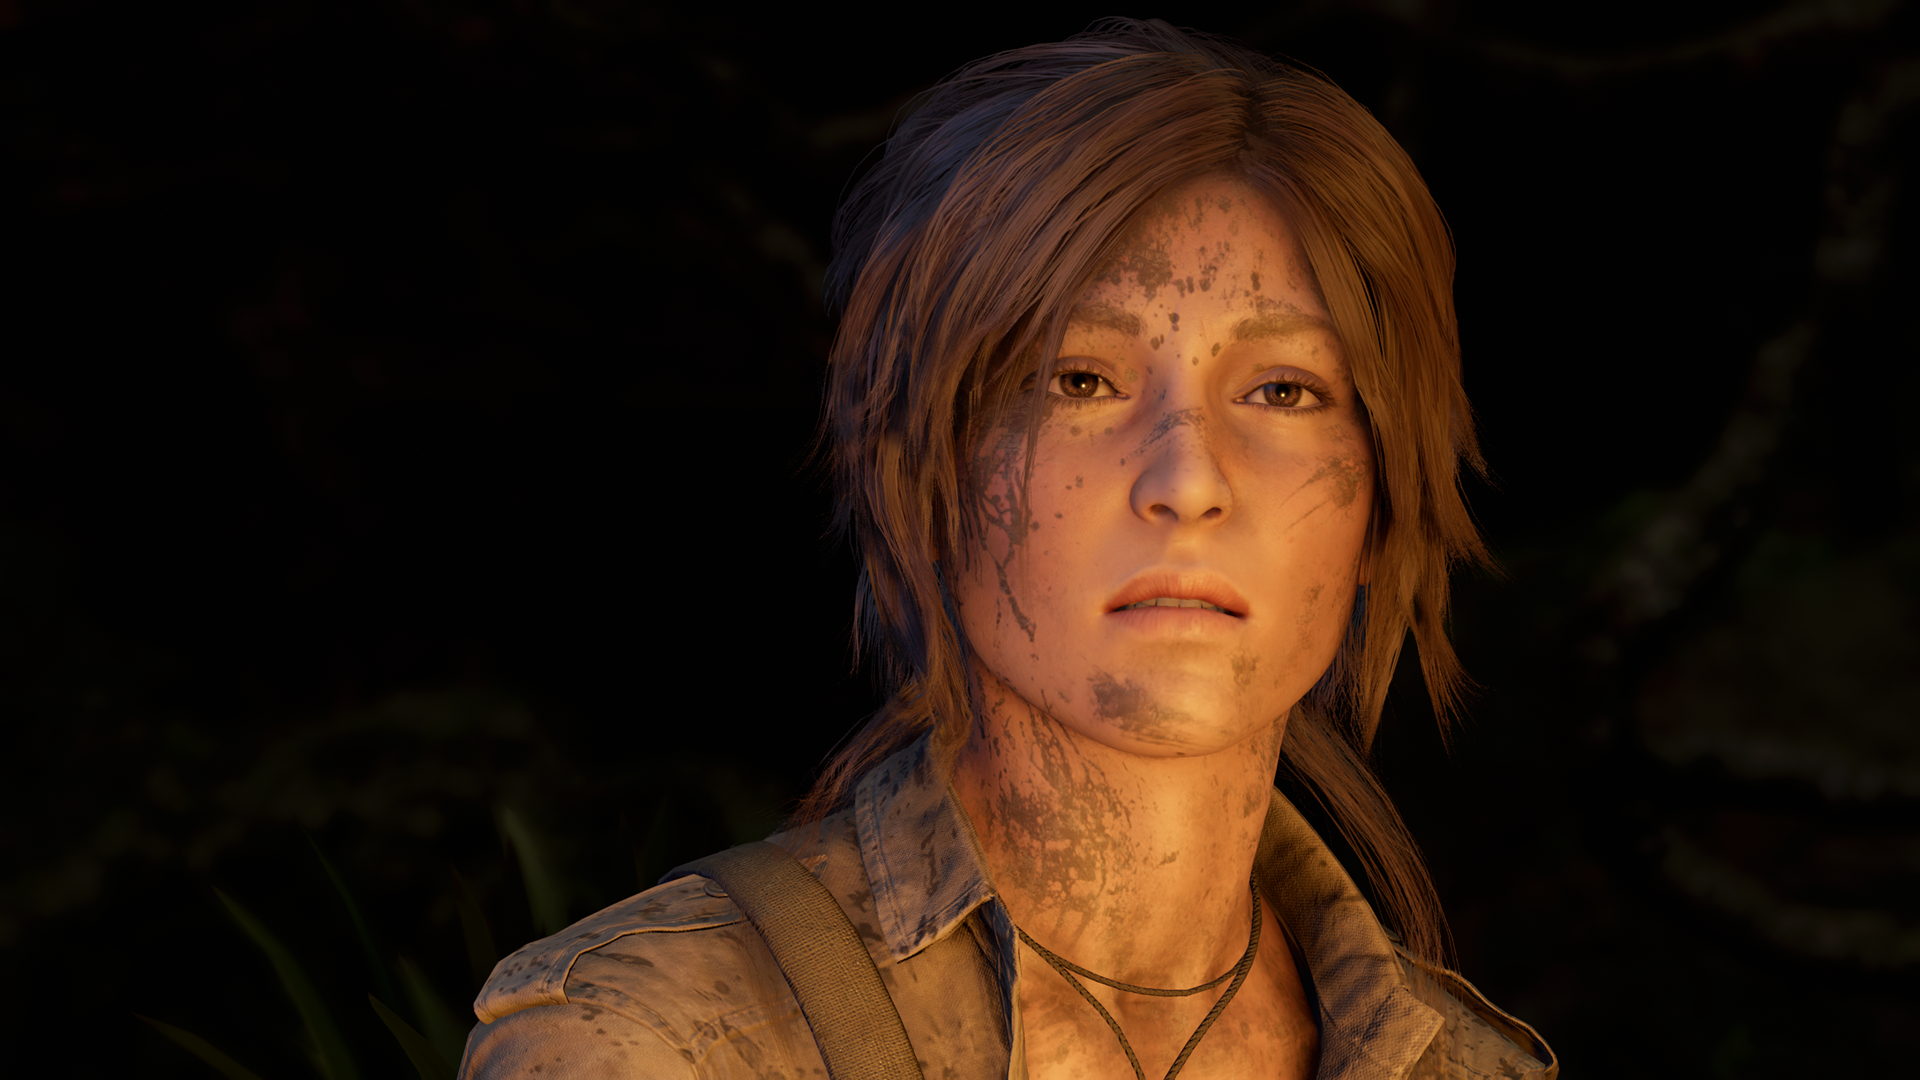 Shadow of the Tomb Raider 2019-12-30 09-52-39.png